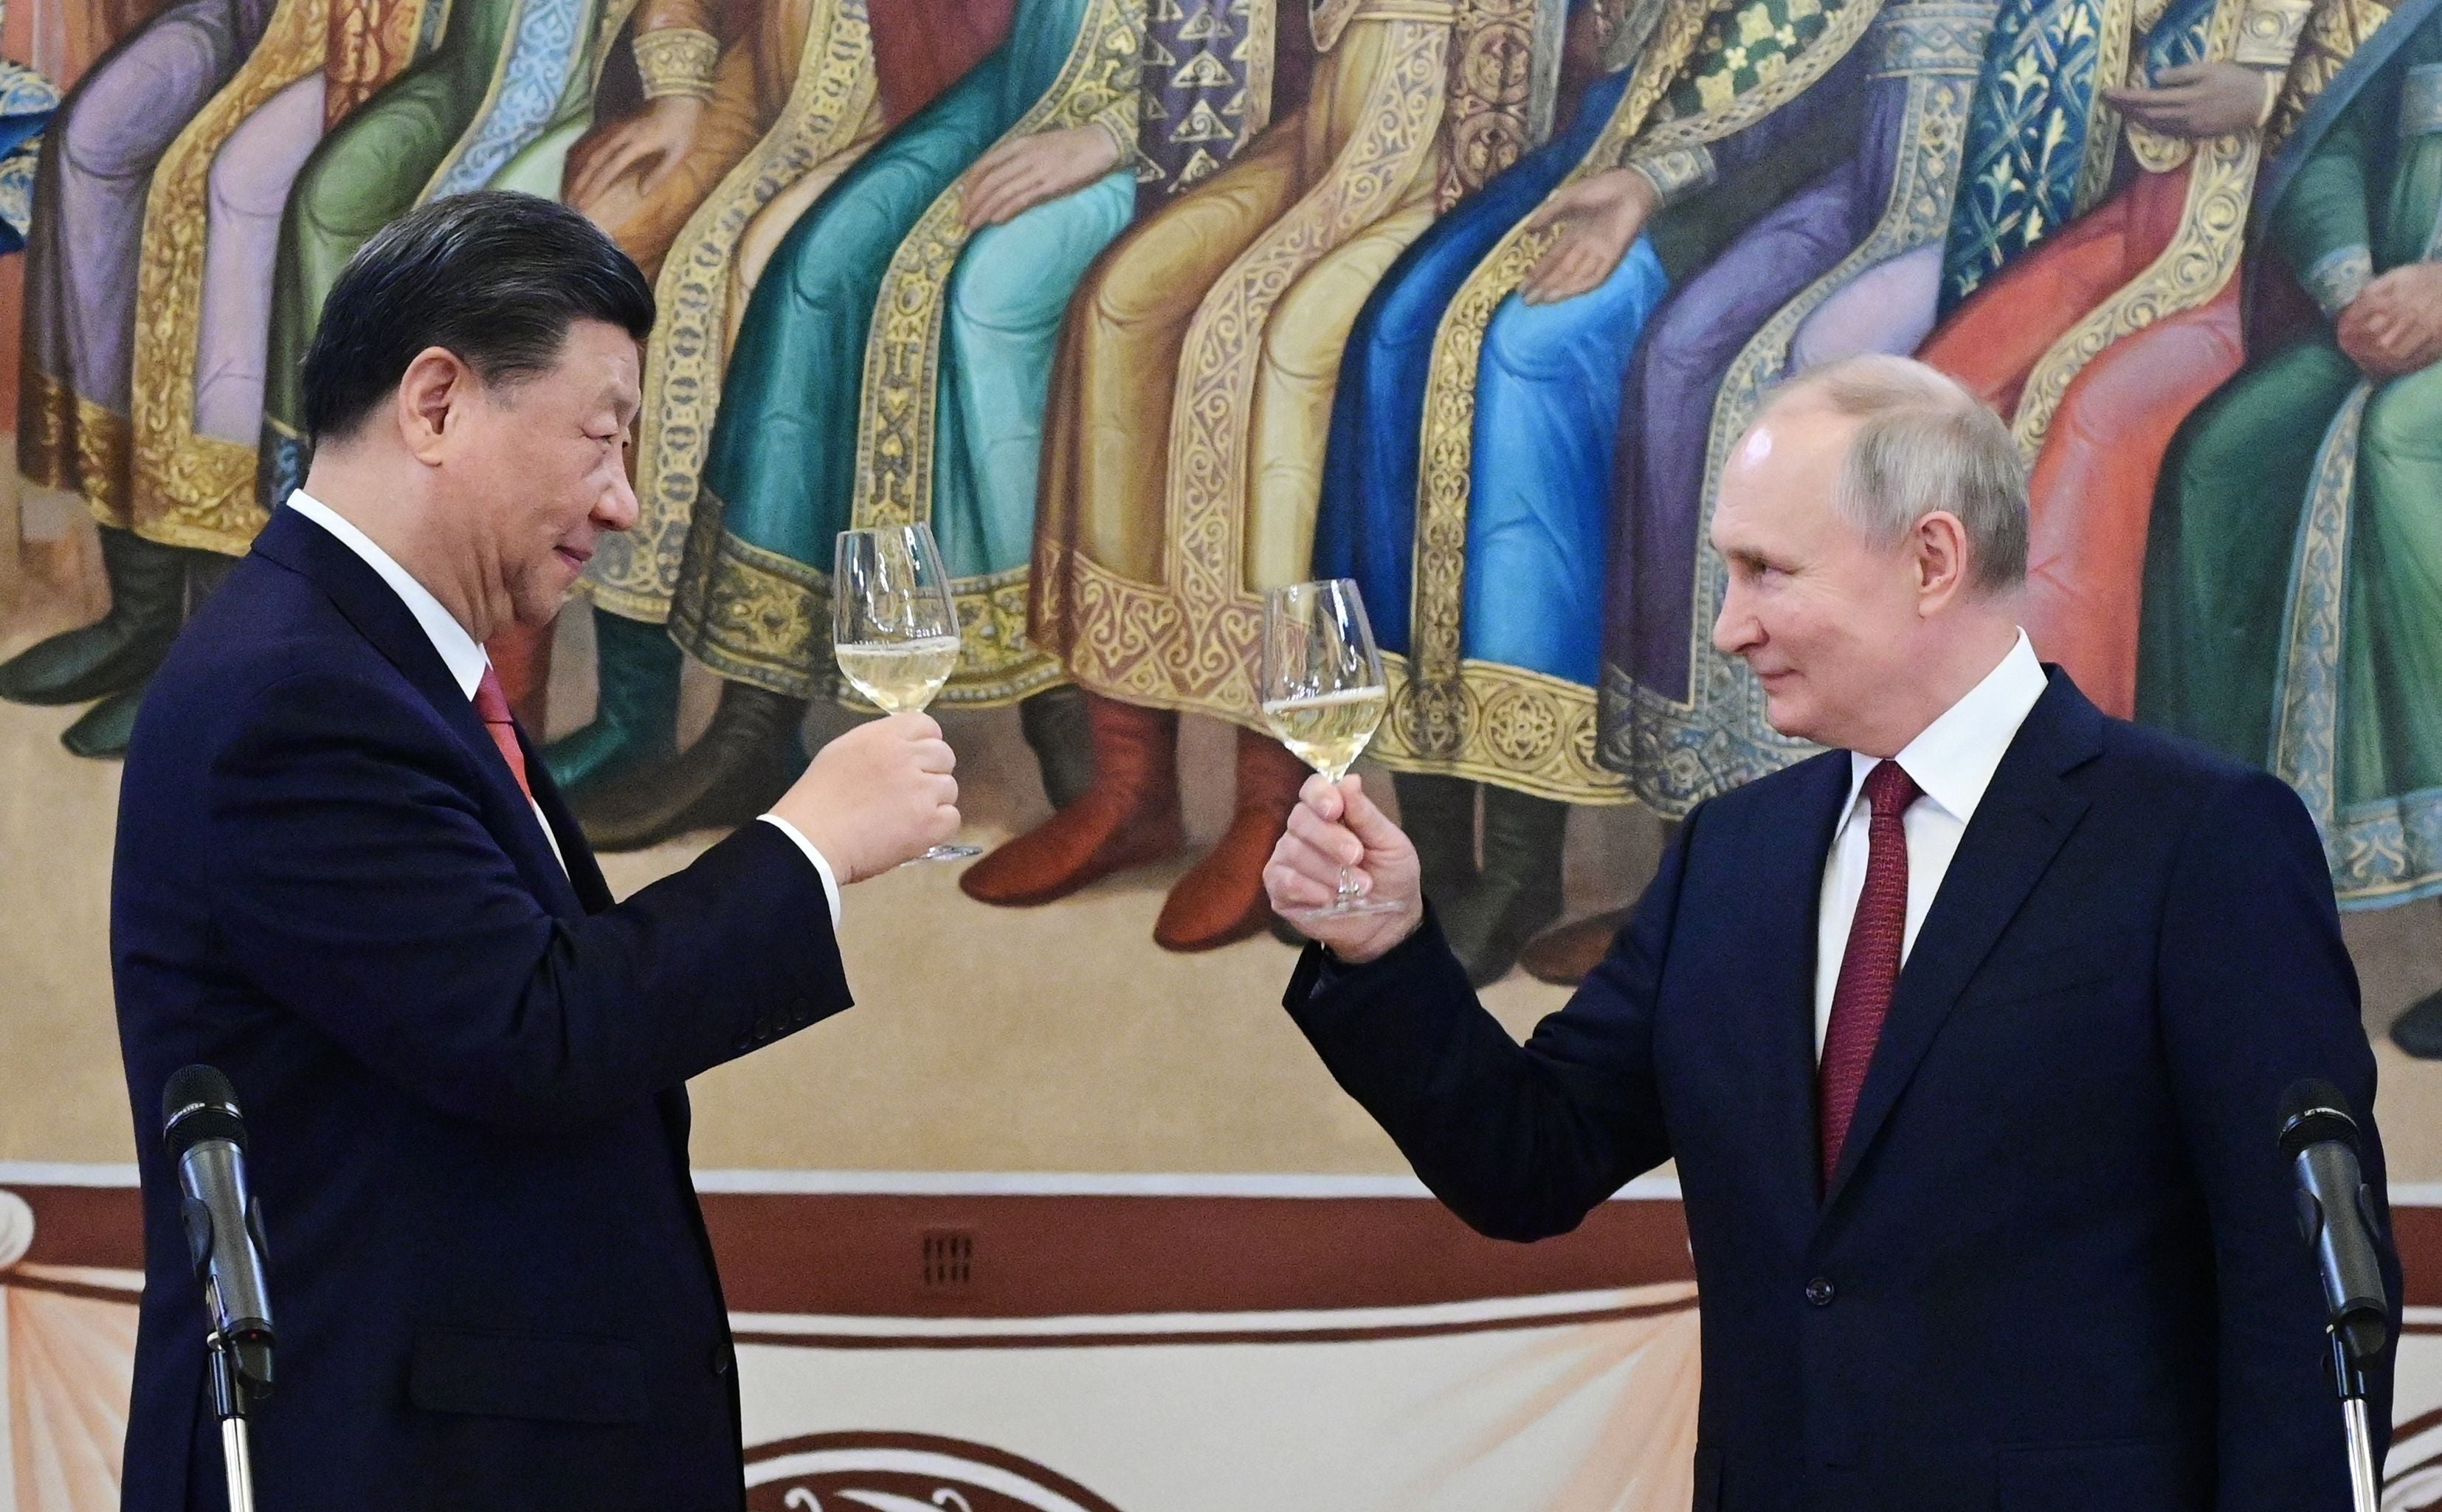 Vladimir Putin and Xi Jinping are meeting for the fourth time since the start of the Ukraine war